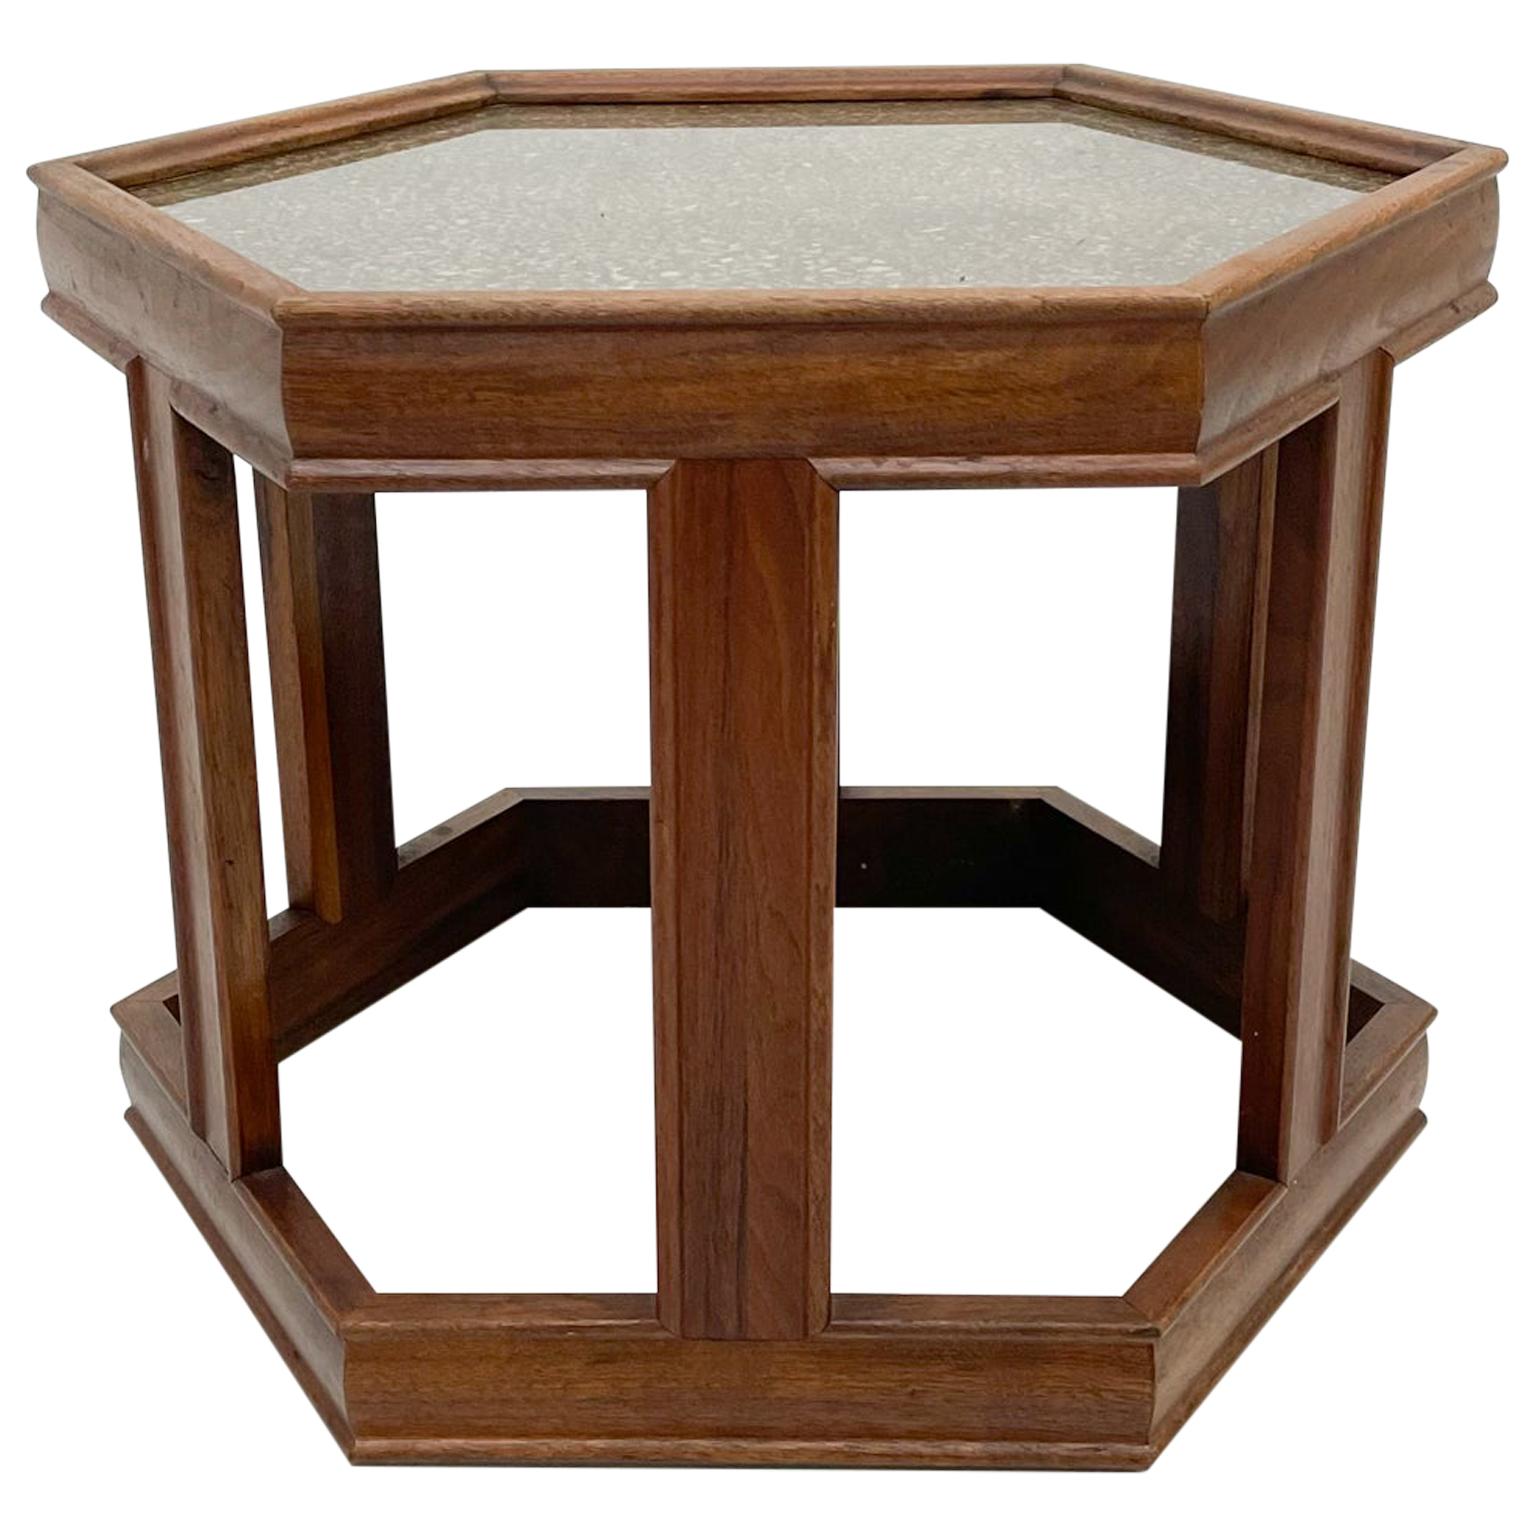 
1960s John Keal for Brown Saltman Hexagonal Side Table
Walnut Wood and Enamel Copper Glass Tabletop
Insert appears as pebble composite under glass
16 h x 18 d
Maker Label
Preowned Unrestored Original Vintage. Vintage Wear present.
Refer to our